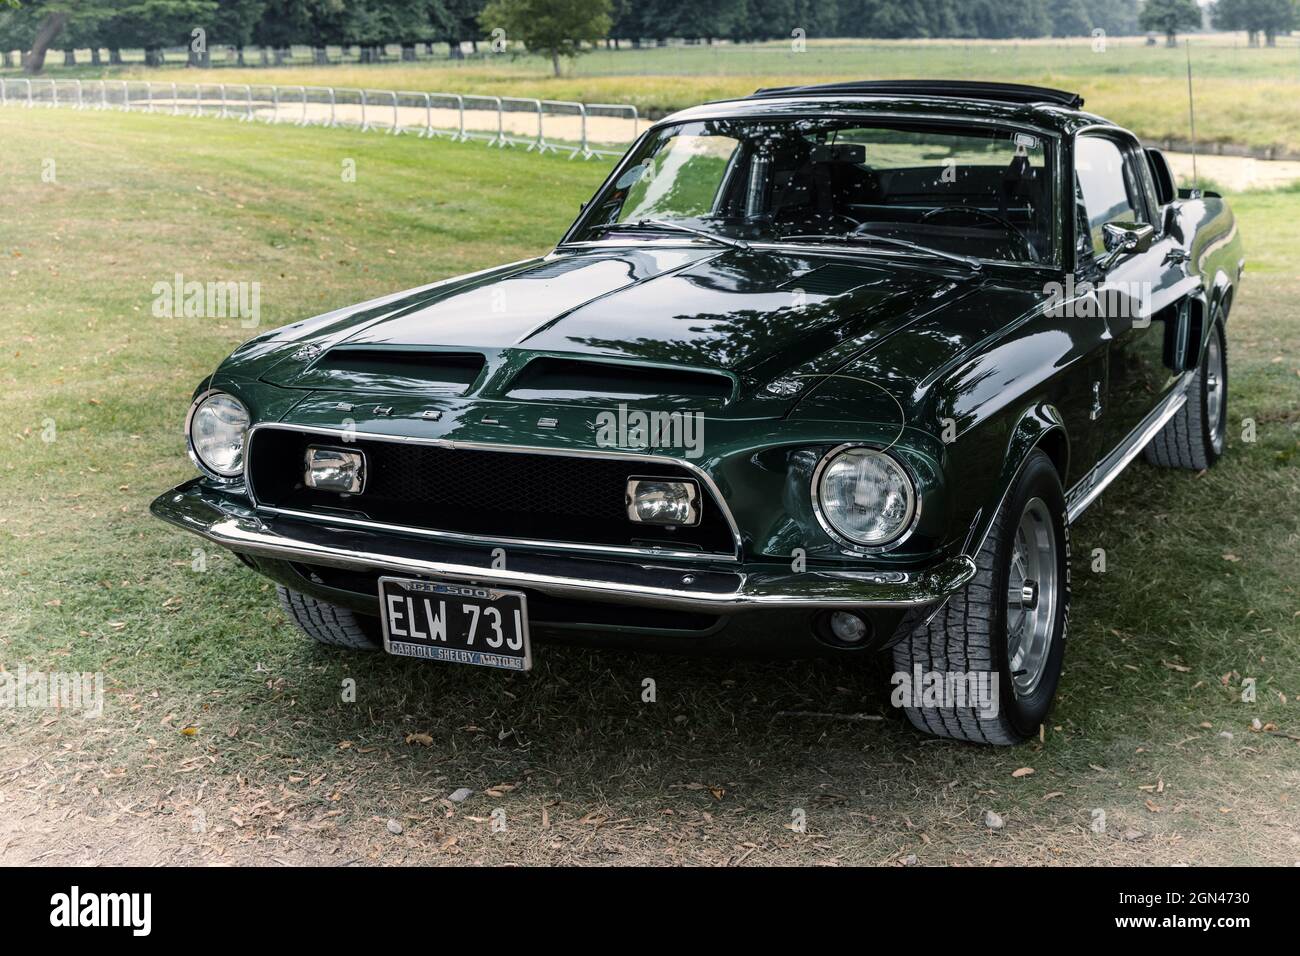 1968 Shelby Ford Mustang GT500, Concours of Elegance 2021, Hampton Court Palace, Londra, Regno Unito Foto Stock